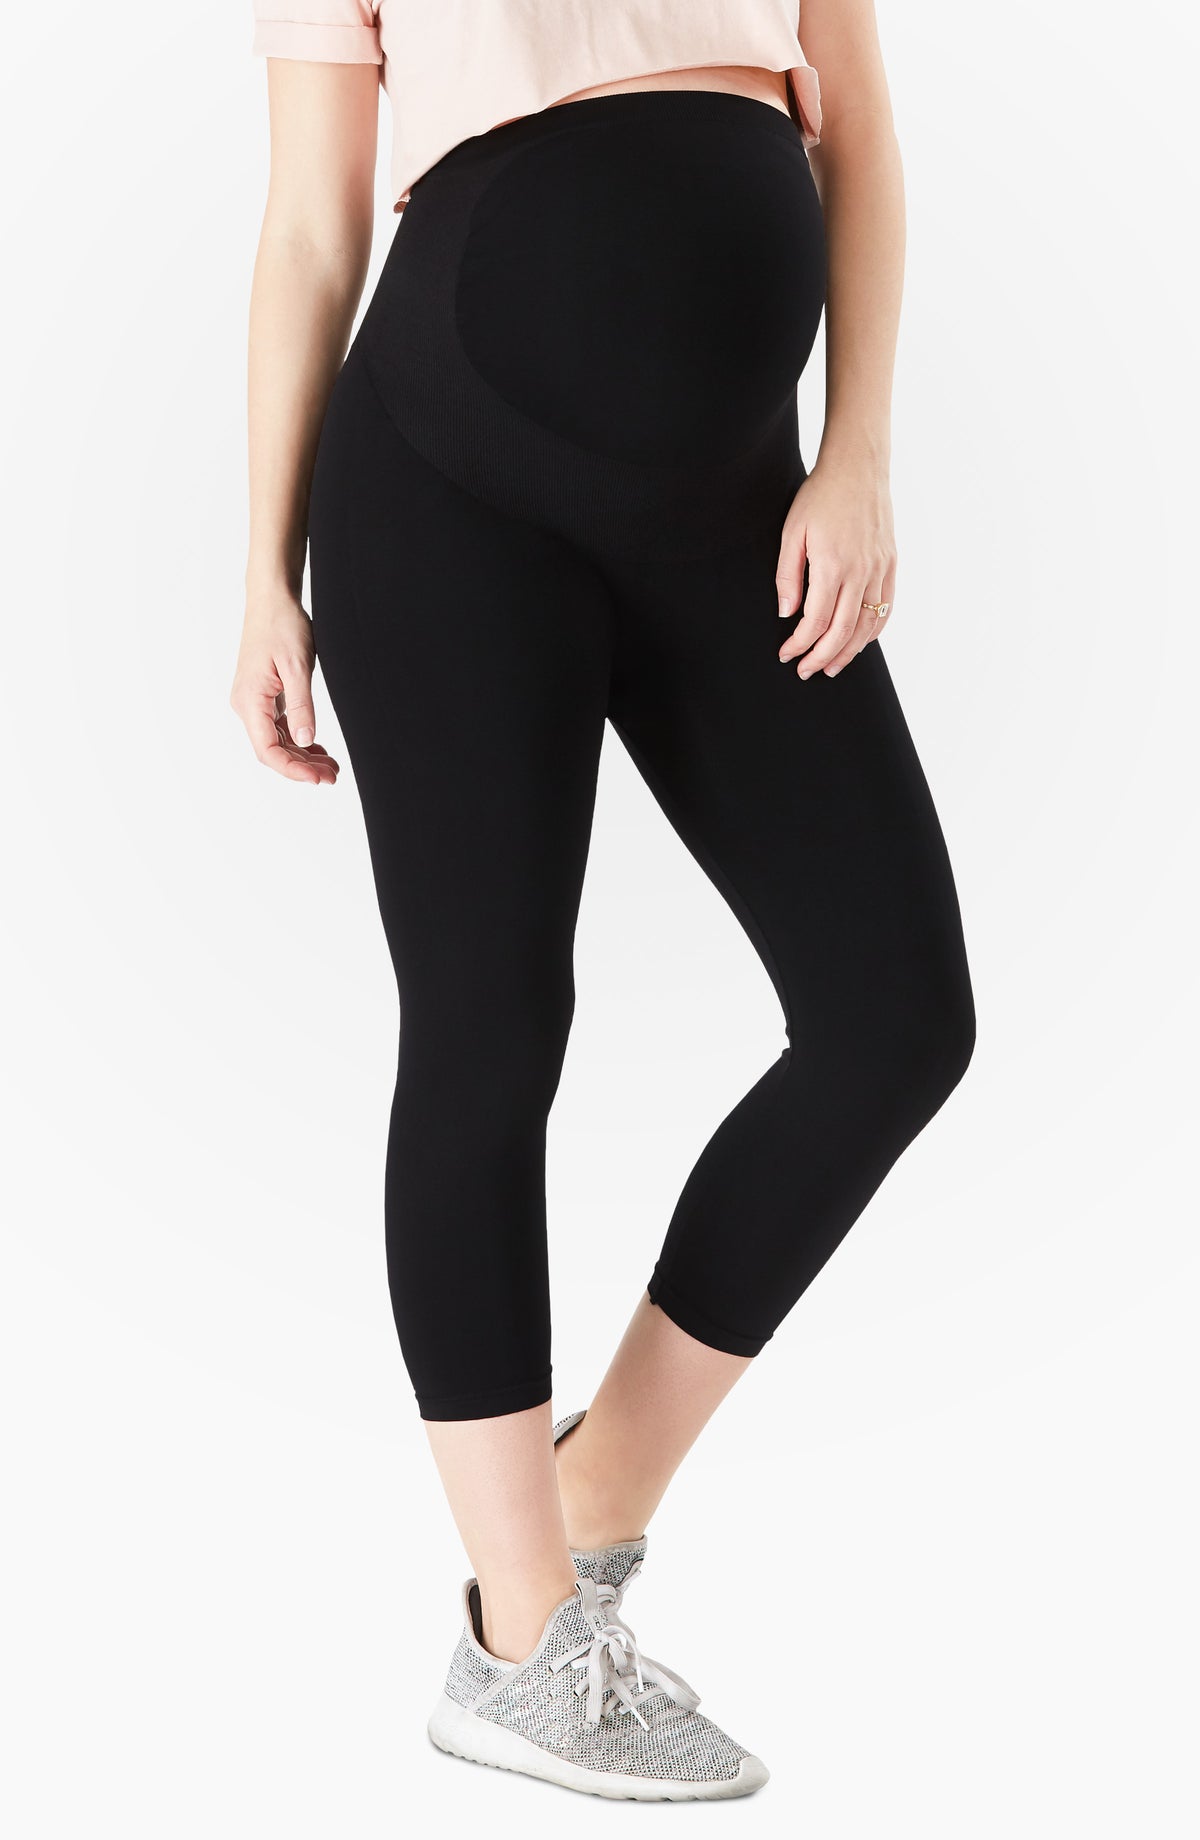 Best Leggings for Moms [Lalabu Leggings + Soothe Shirt Review] • COVET by  tricia